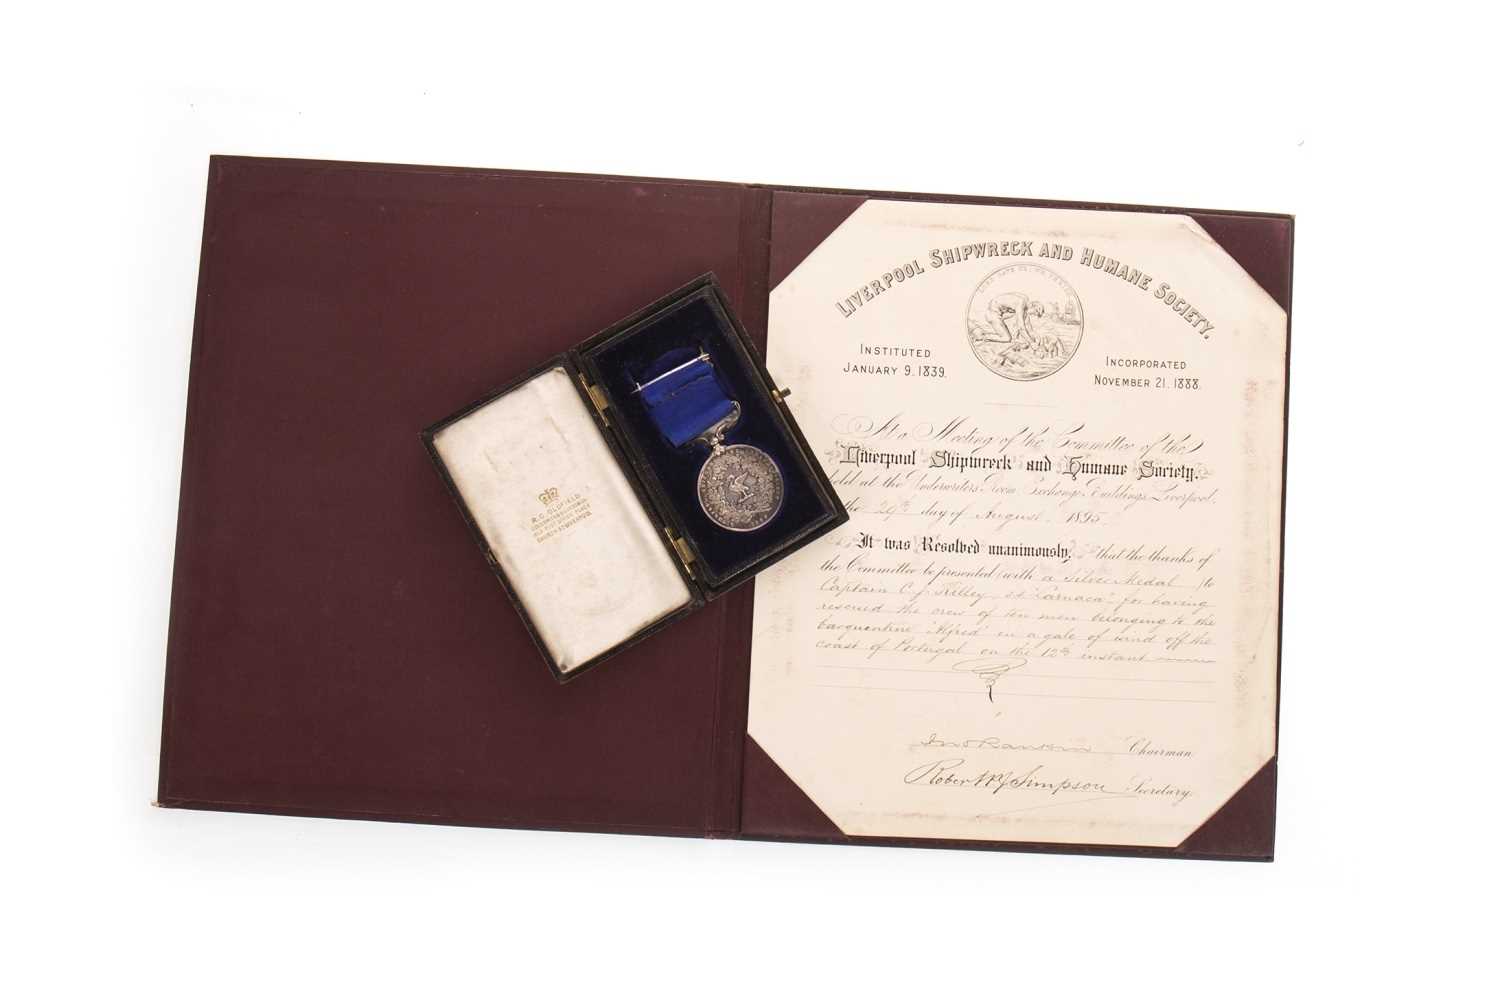 Lot 847 - A LIVERPOOL SHIPWRECK AND HUMANE SOCIETY MEDAL AWARDED TO CAPT. C. J. KILLEY